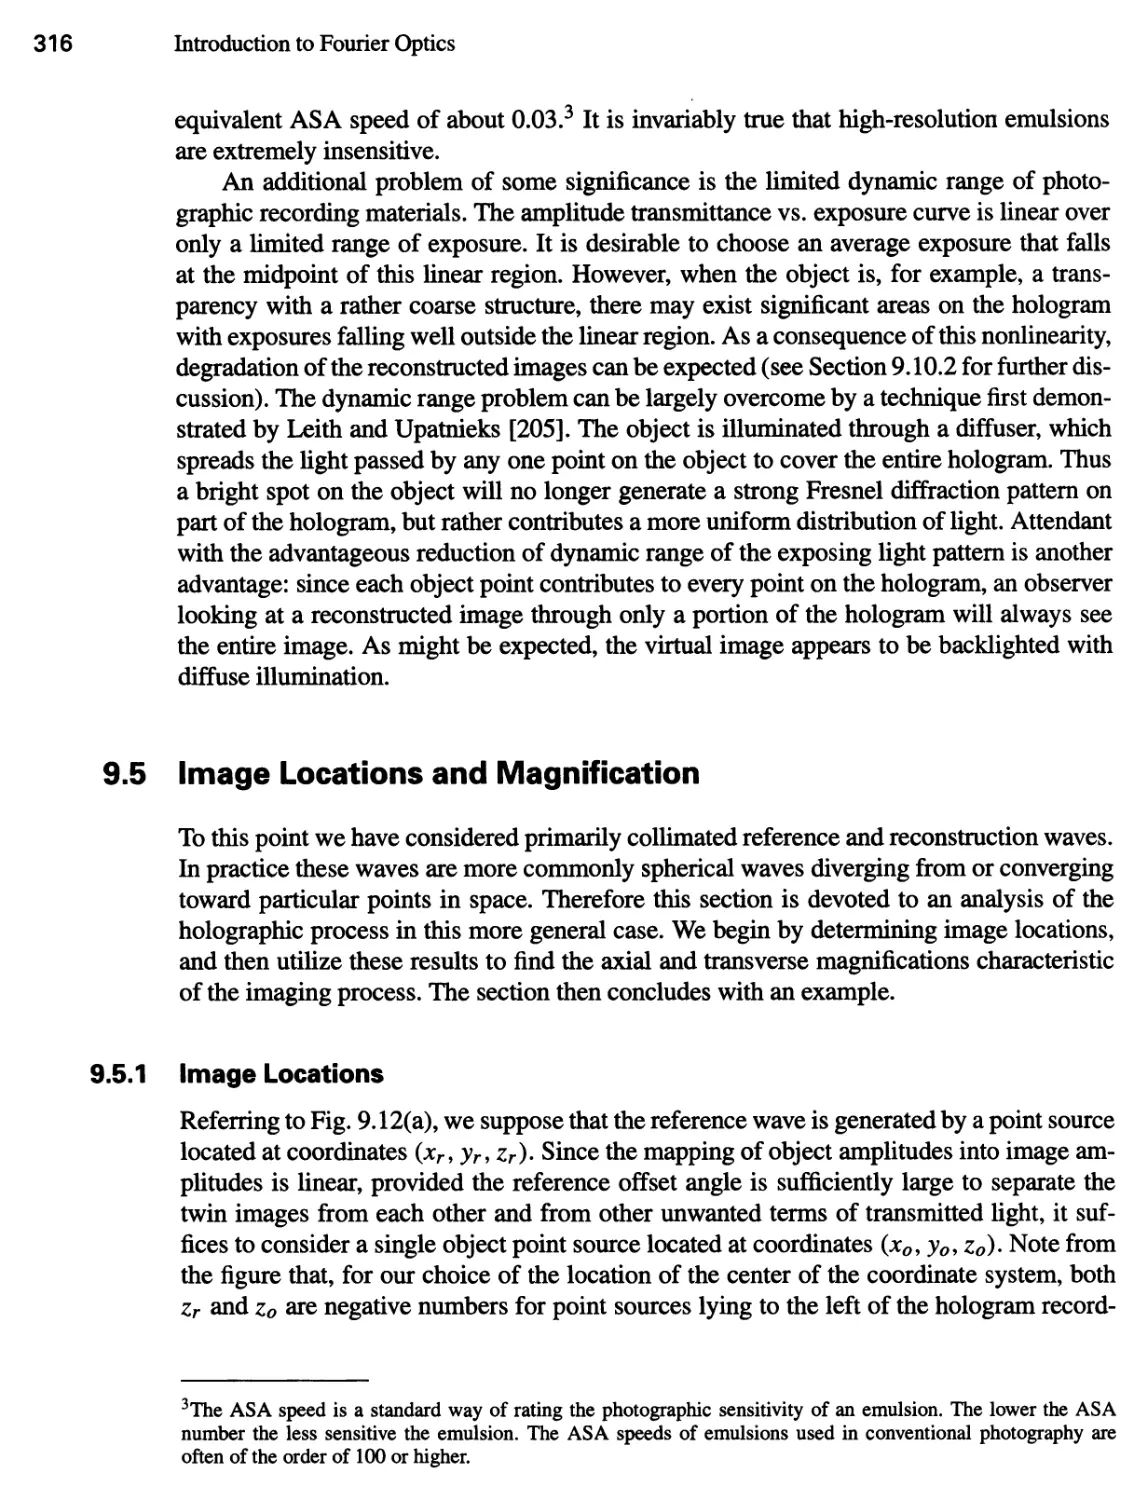 9.5 Image Locations and Magnification 316